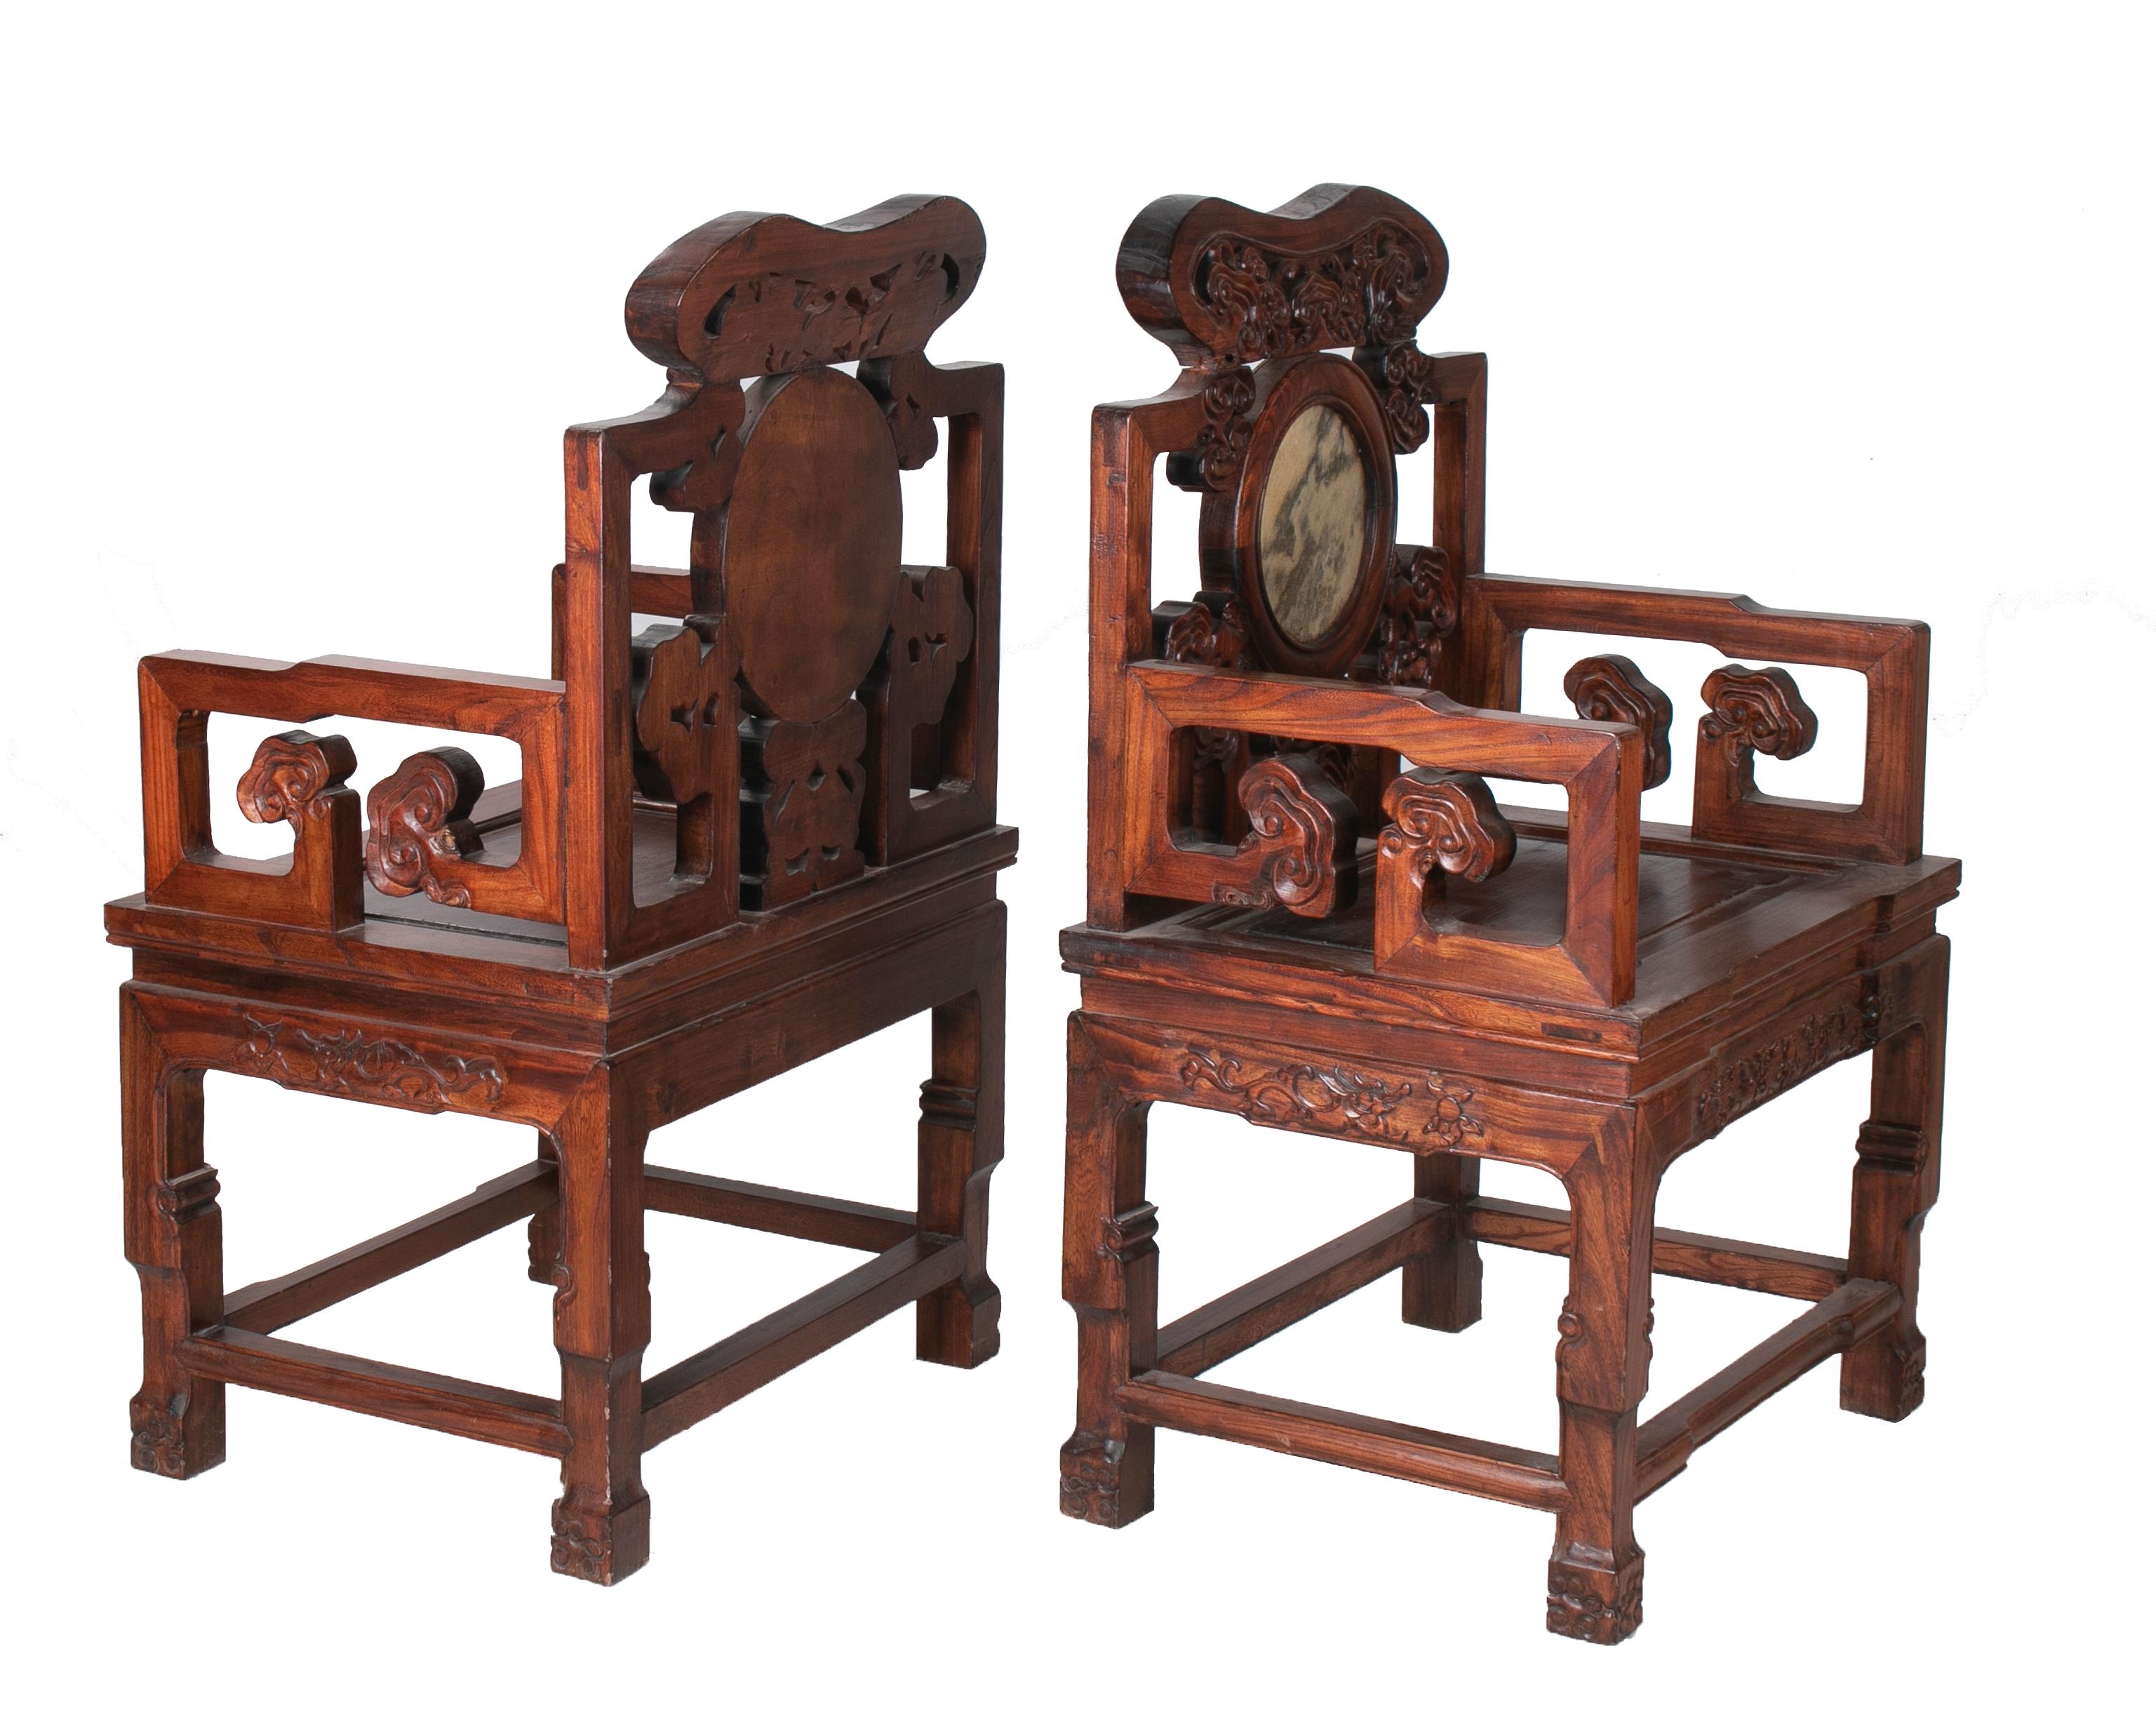 1950s pair of Chinese chairs with inset round stone inlay in backrest.